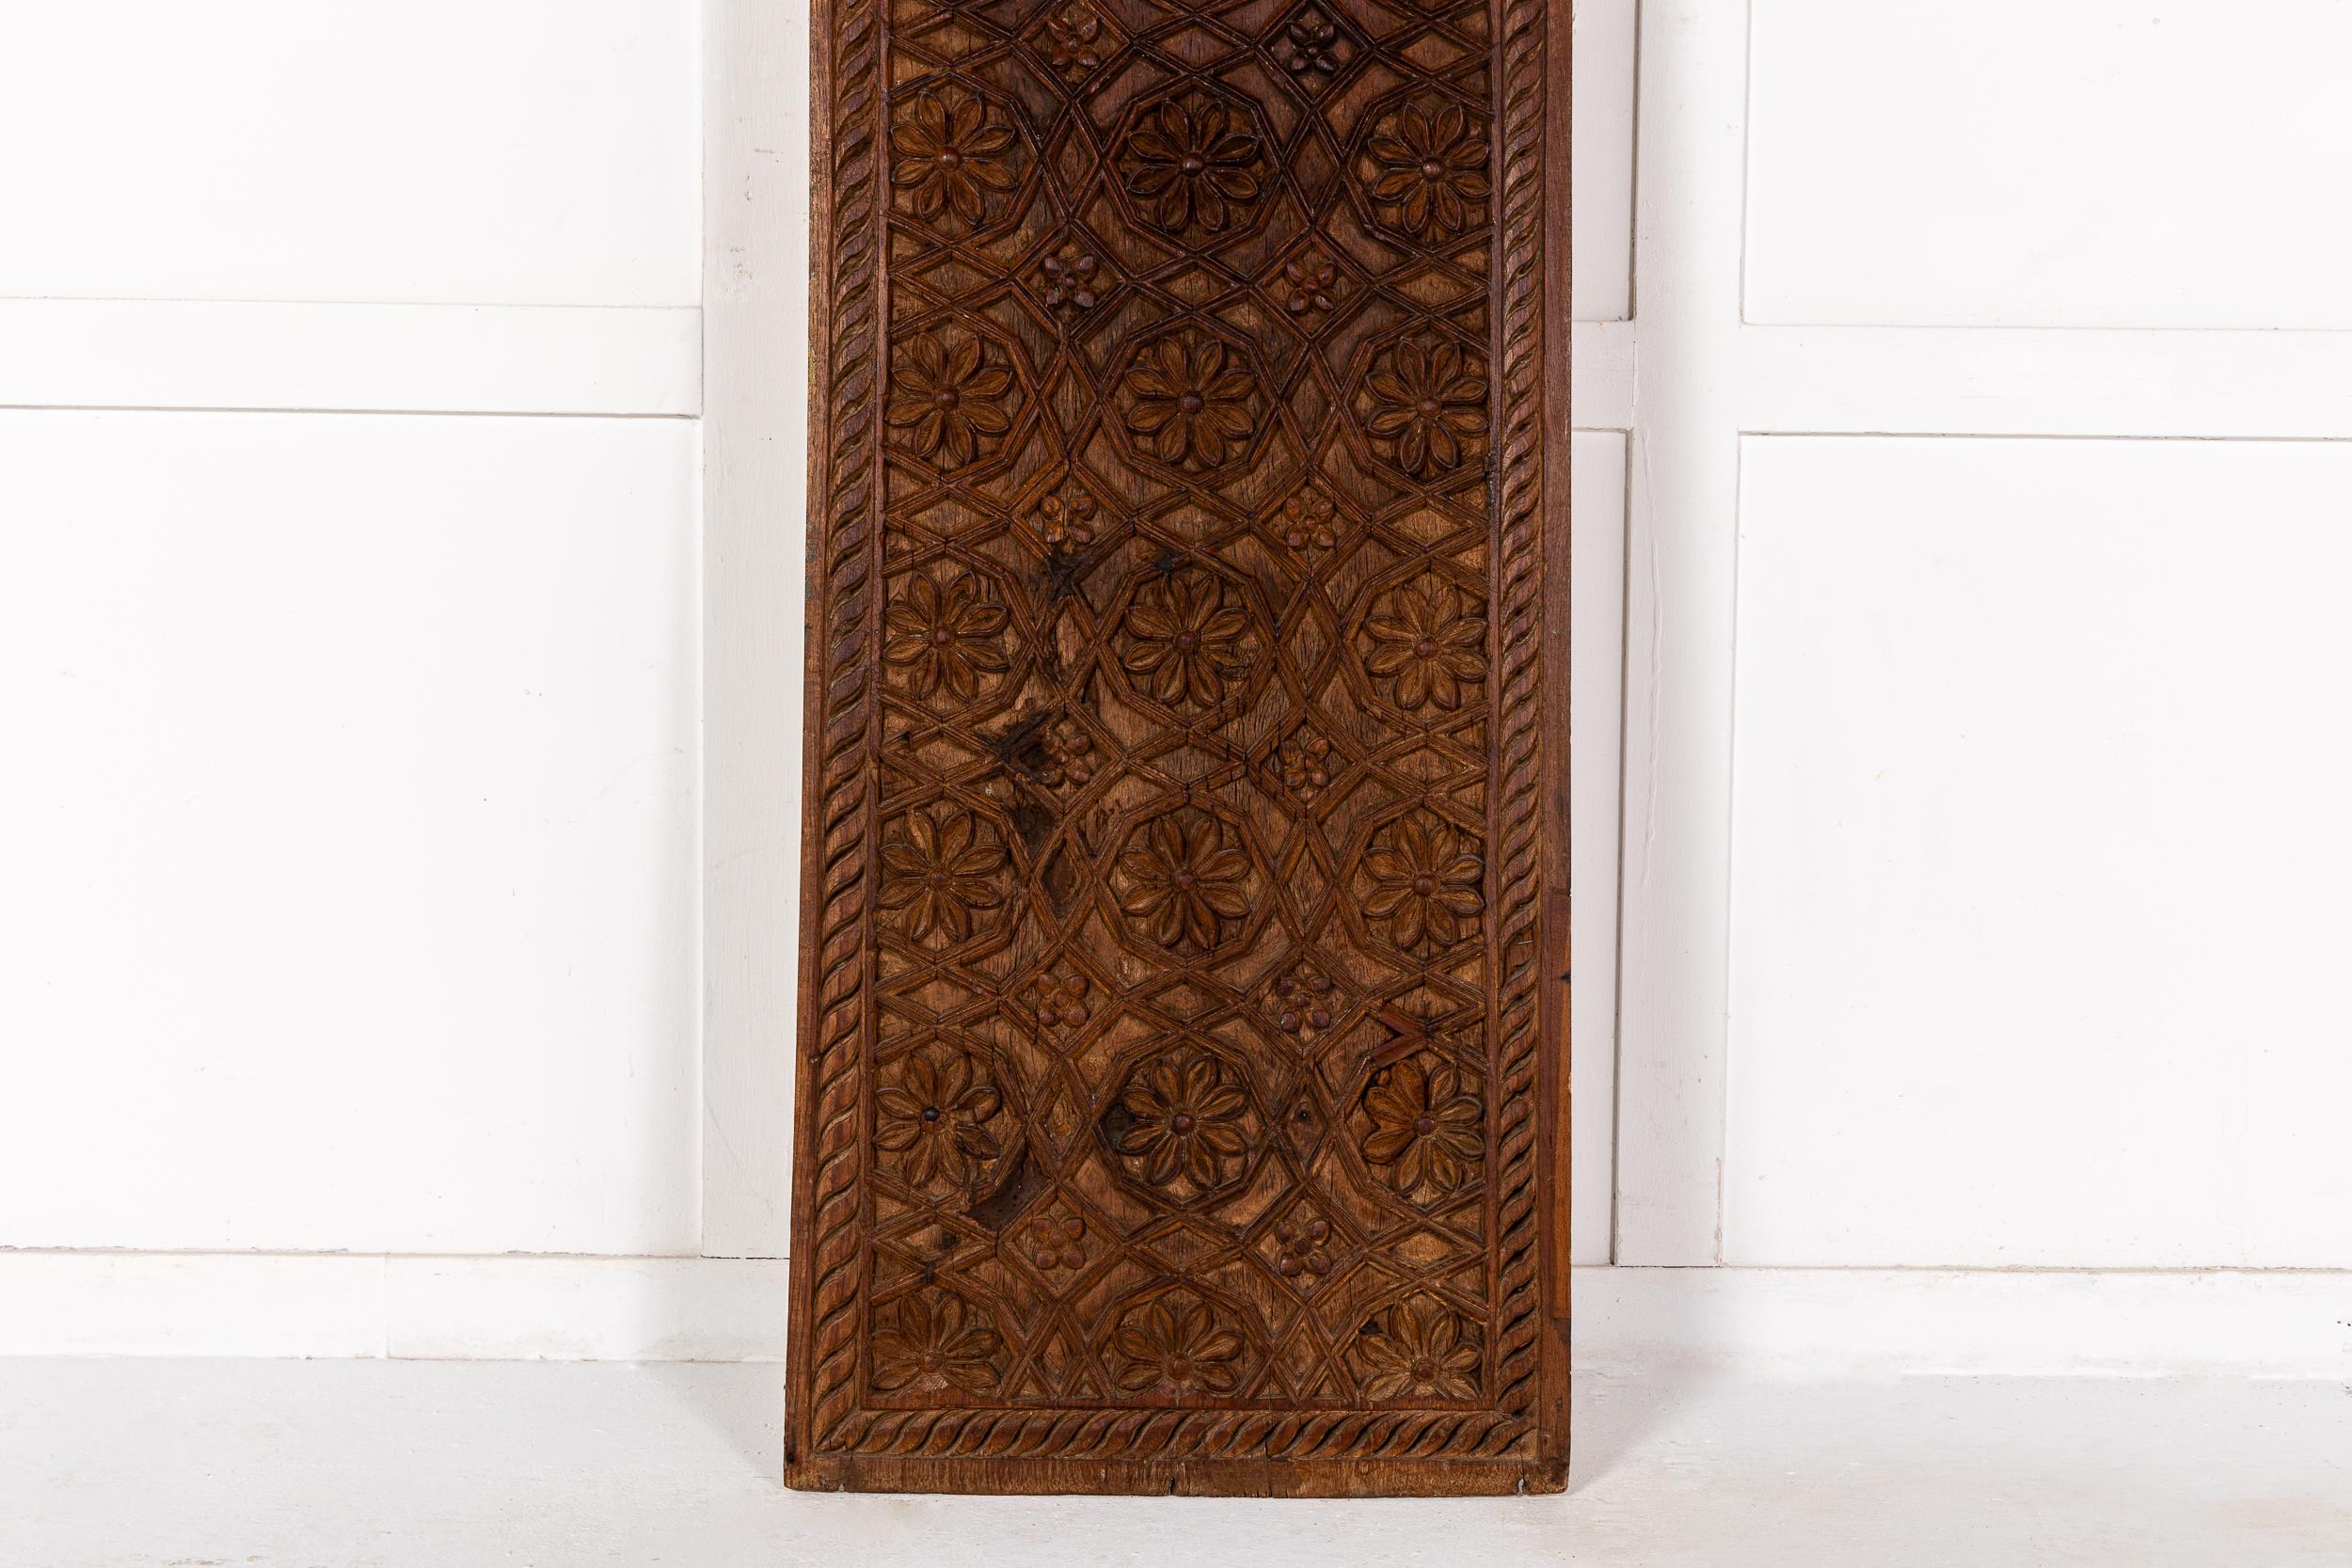 A Very Large 19th Century Carved Hardwood Panel, Probably Syrian.

The panel with all over carved floral and scrollwork decoration with a leafy gadrooned border. Of large size and in excellent condition, this piece shows carving of exceptionally